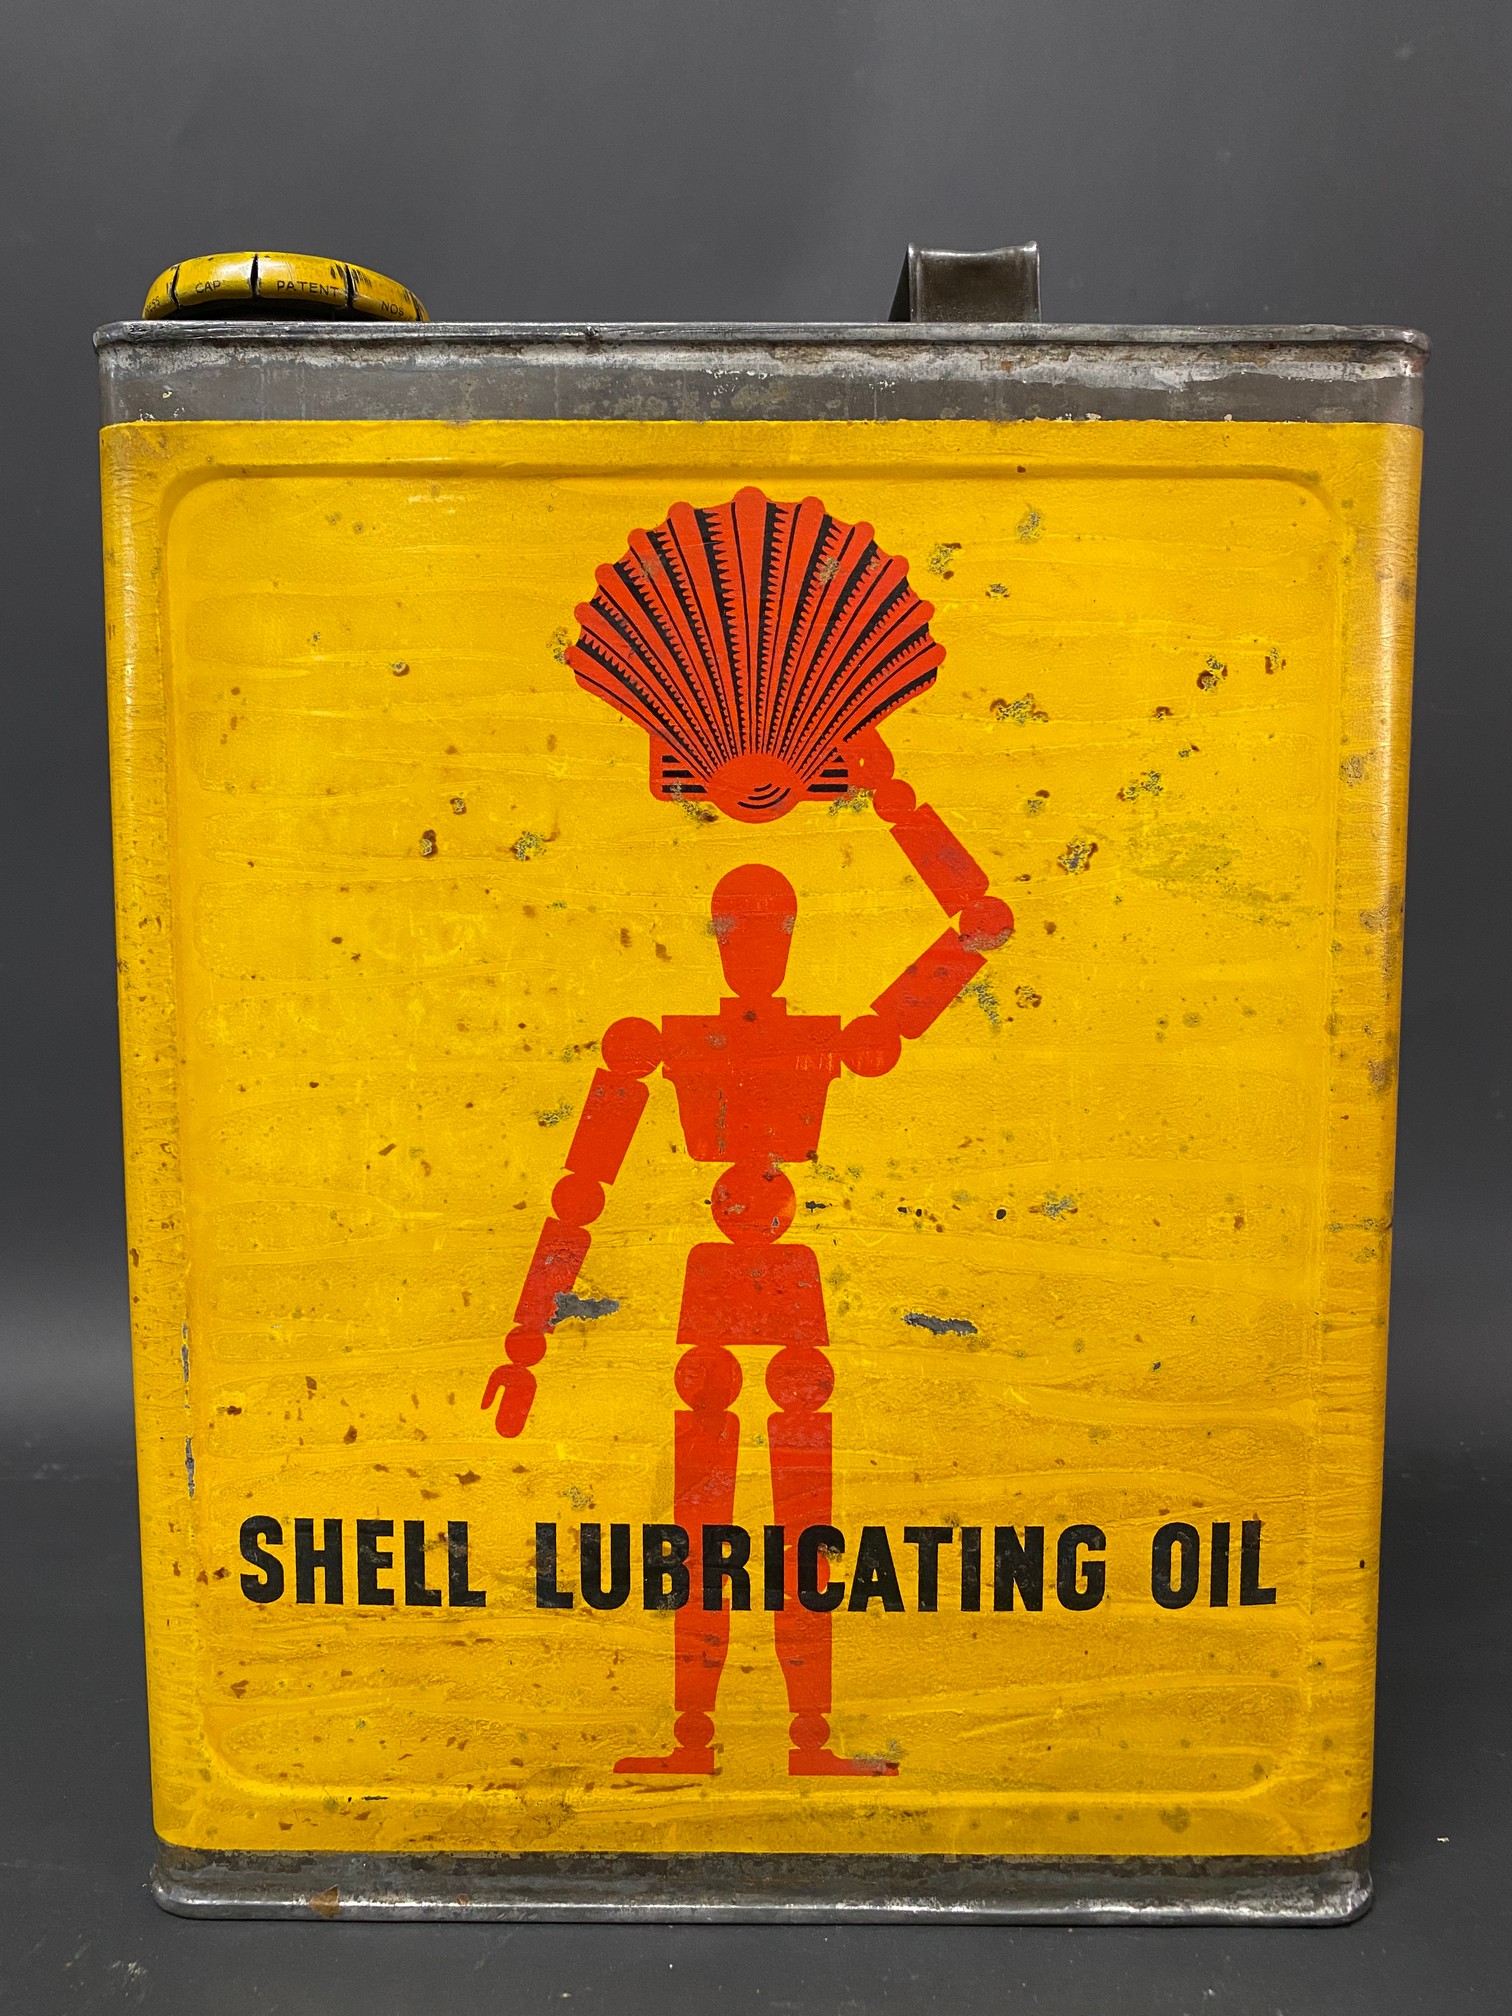 A Shell Lubricating Oil rectangular gallon can with robot/stick man motif, excellent condition.